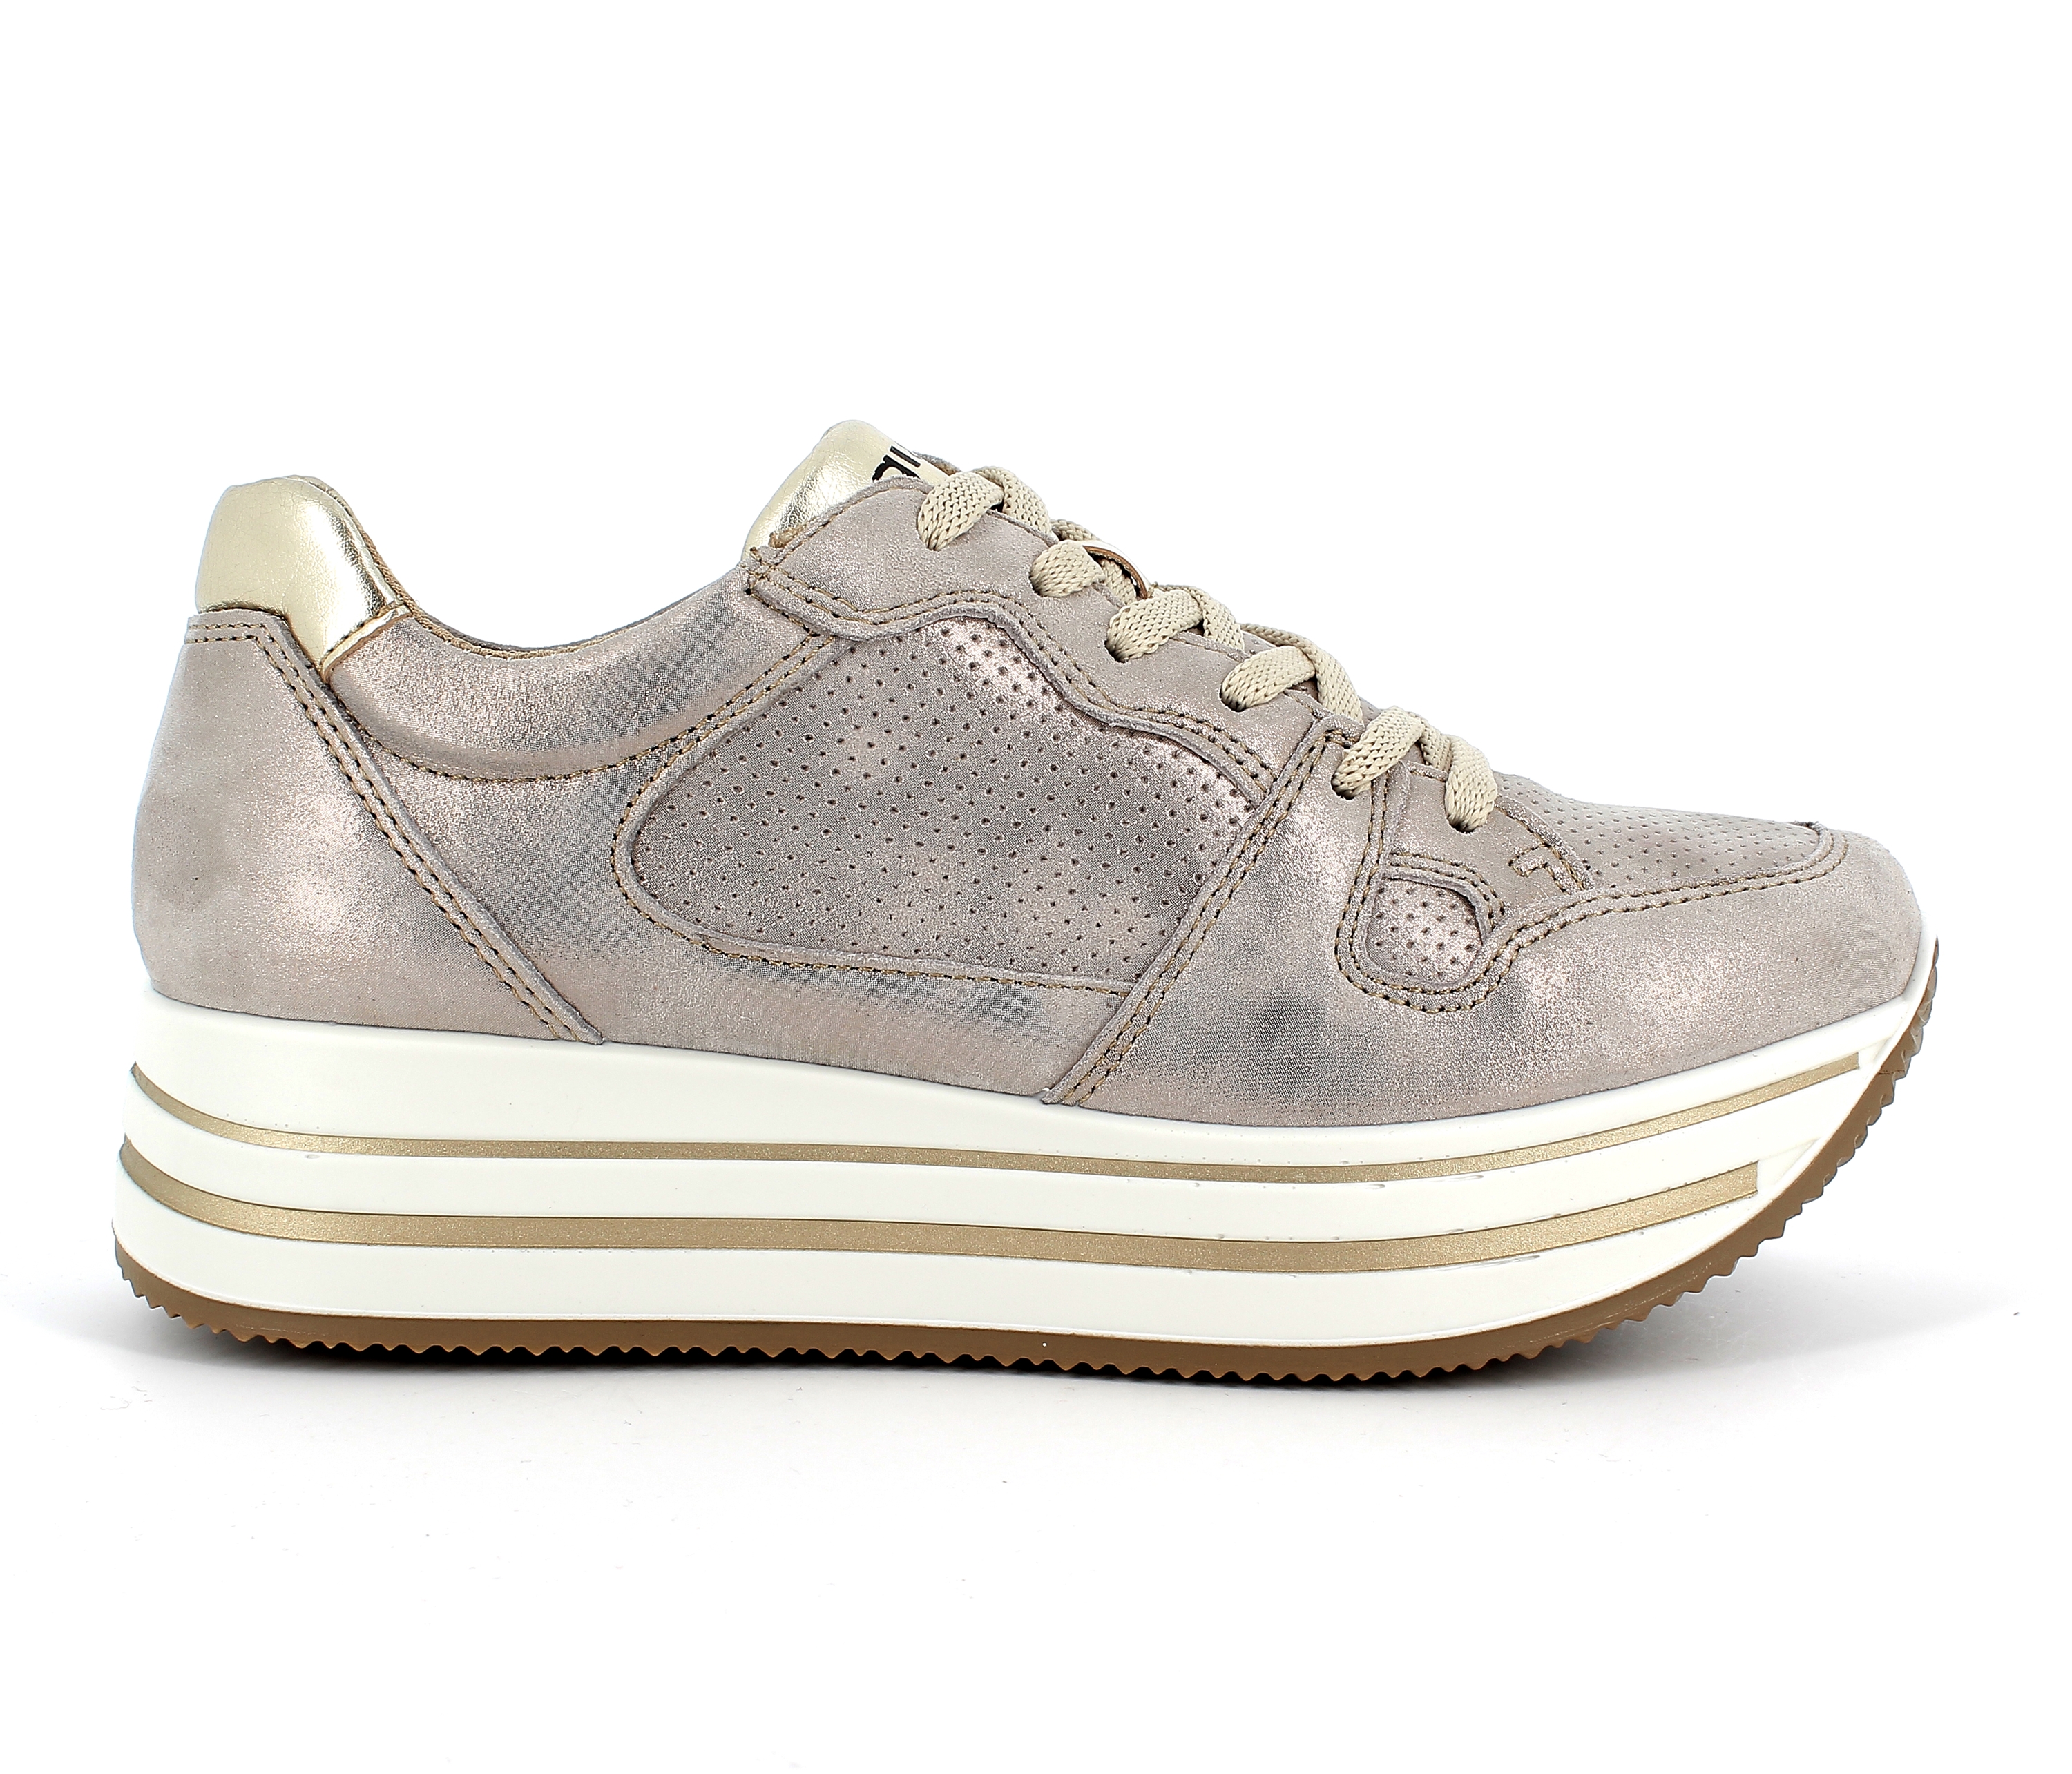 Dky 71521 - Taupe Leather